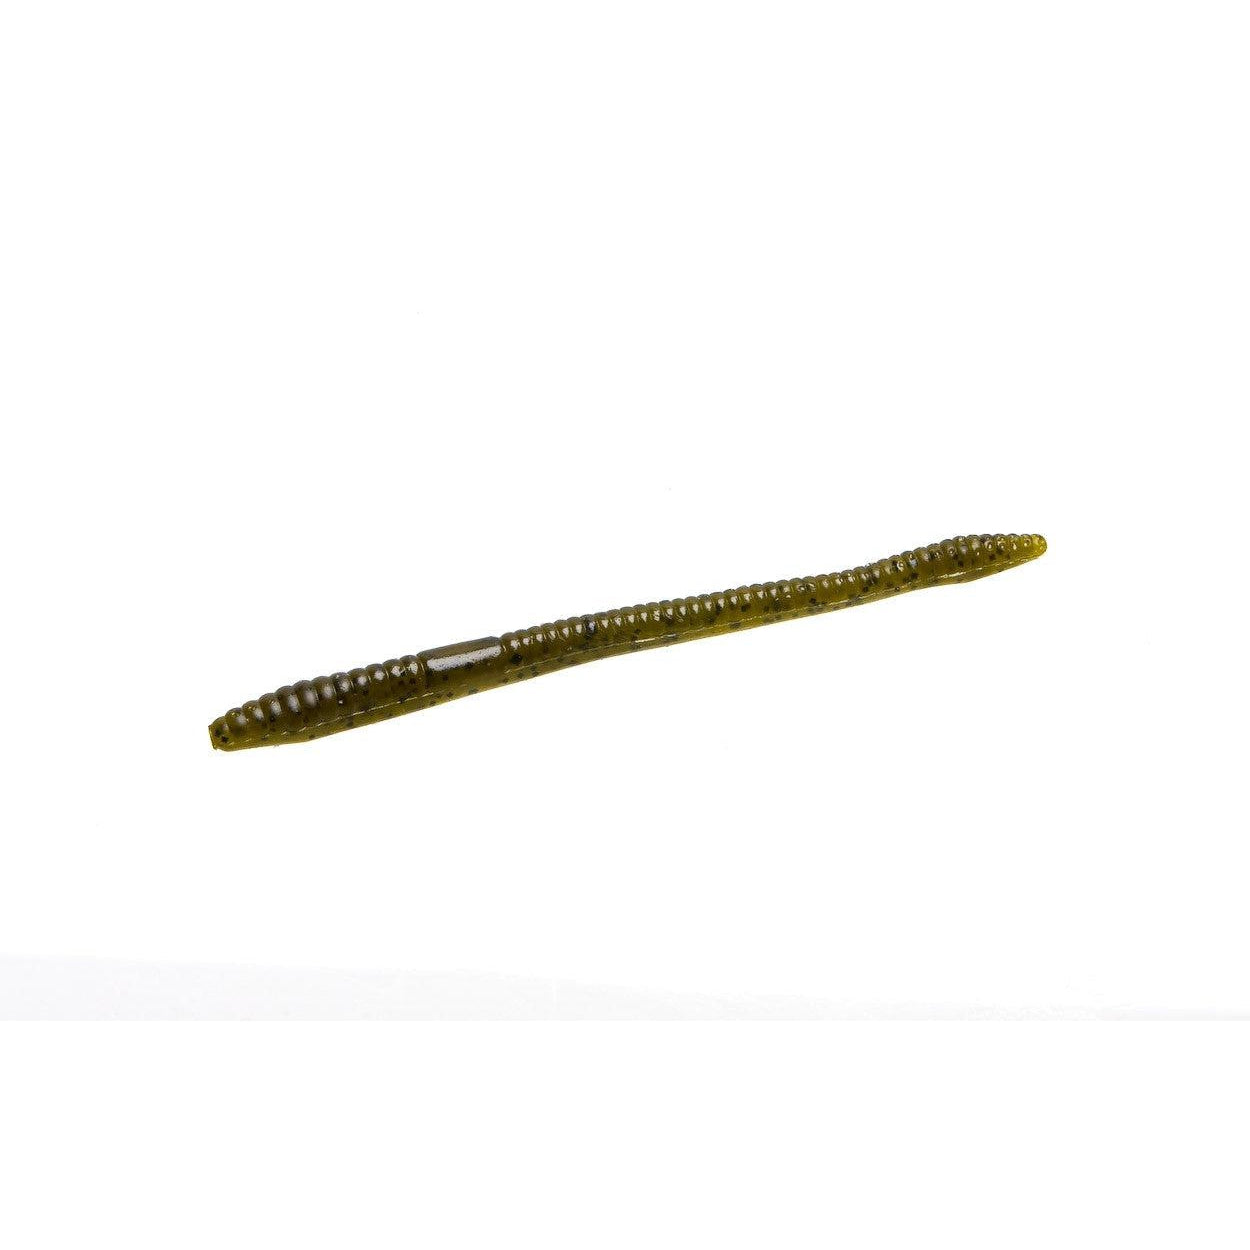 Zoom Finesse Worm 4 3/4